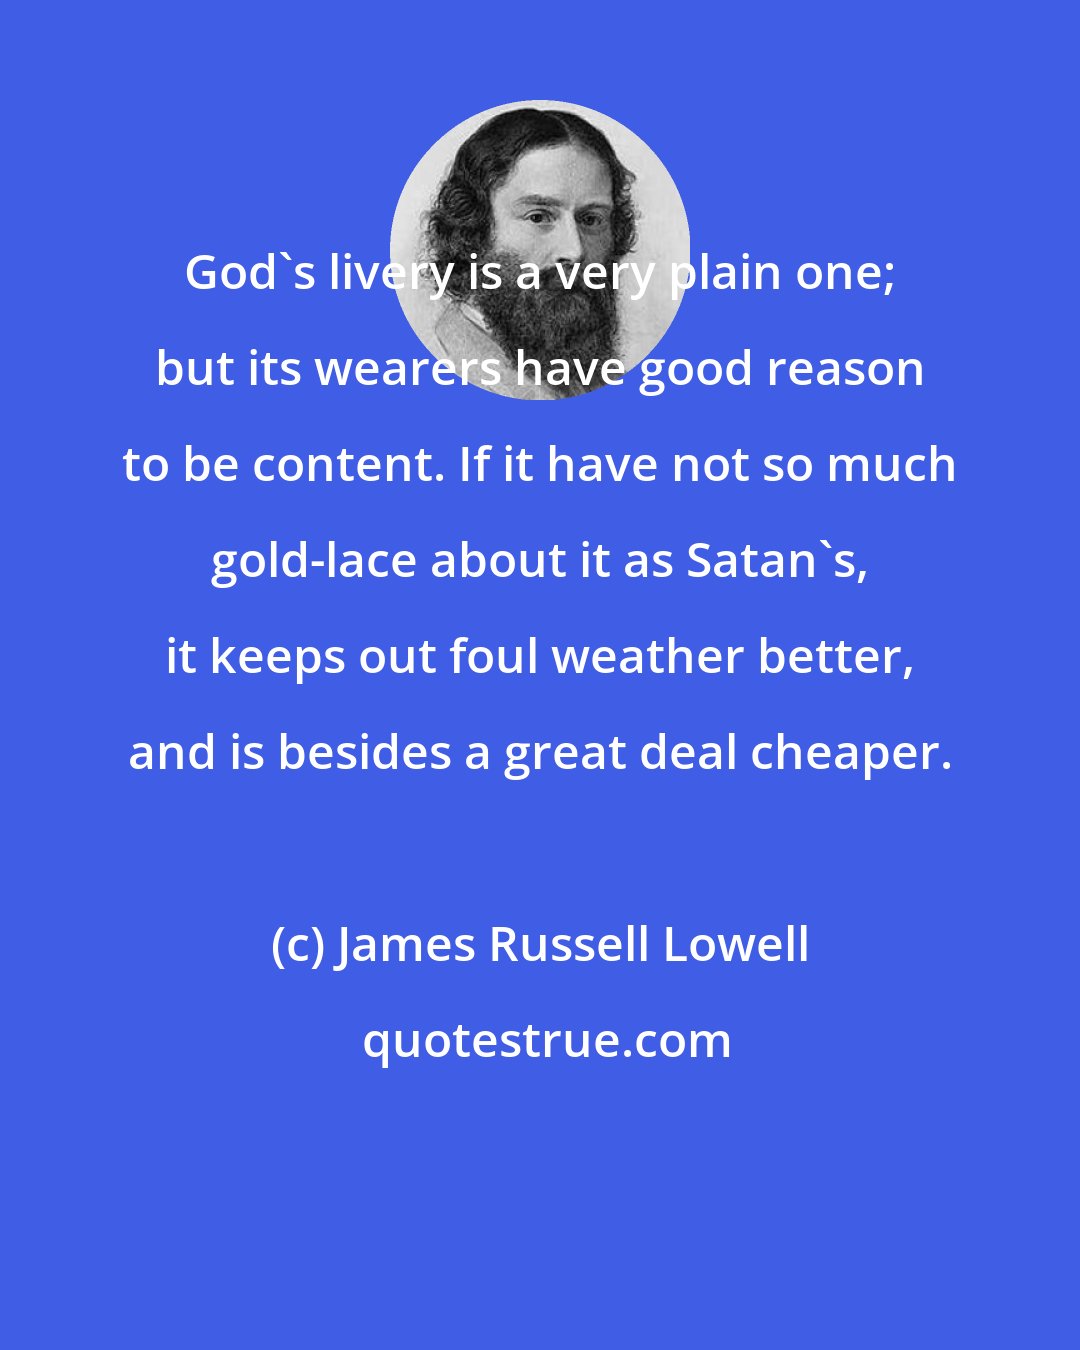 James Russell Lowell: God's livery is a very plain one; but its wearers have good reason to be content. If it have not so much gold-lace about it as Satan's, it keeps out foul weather better, and is besides a great deal cheaper.